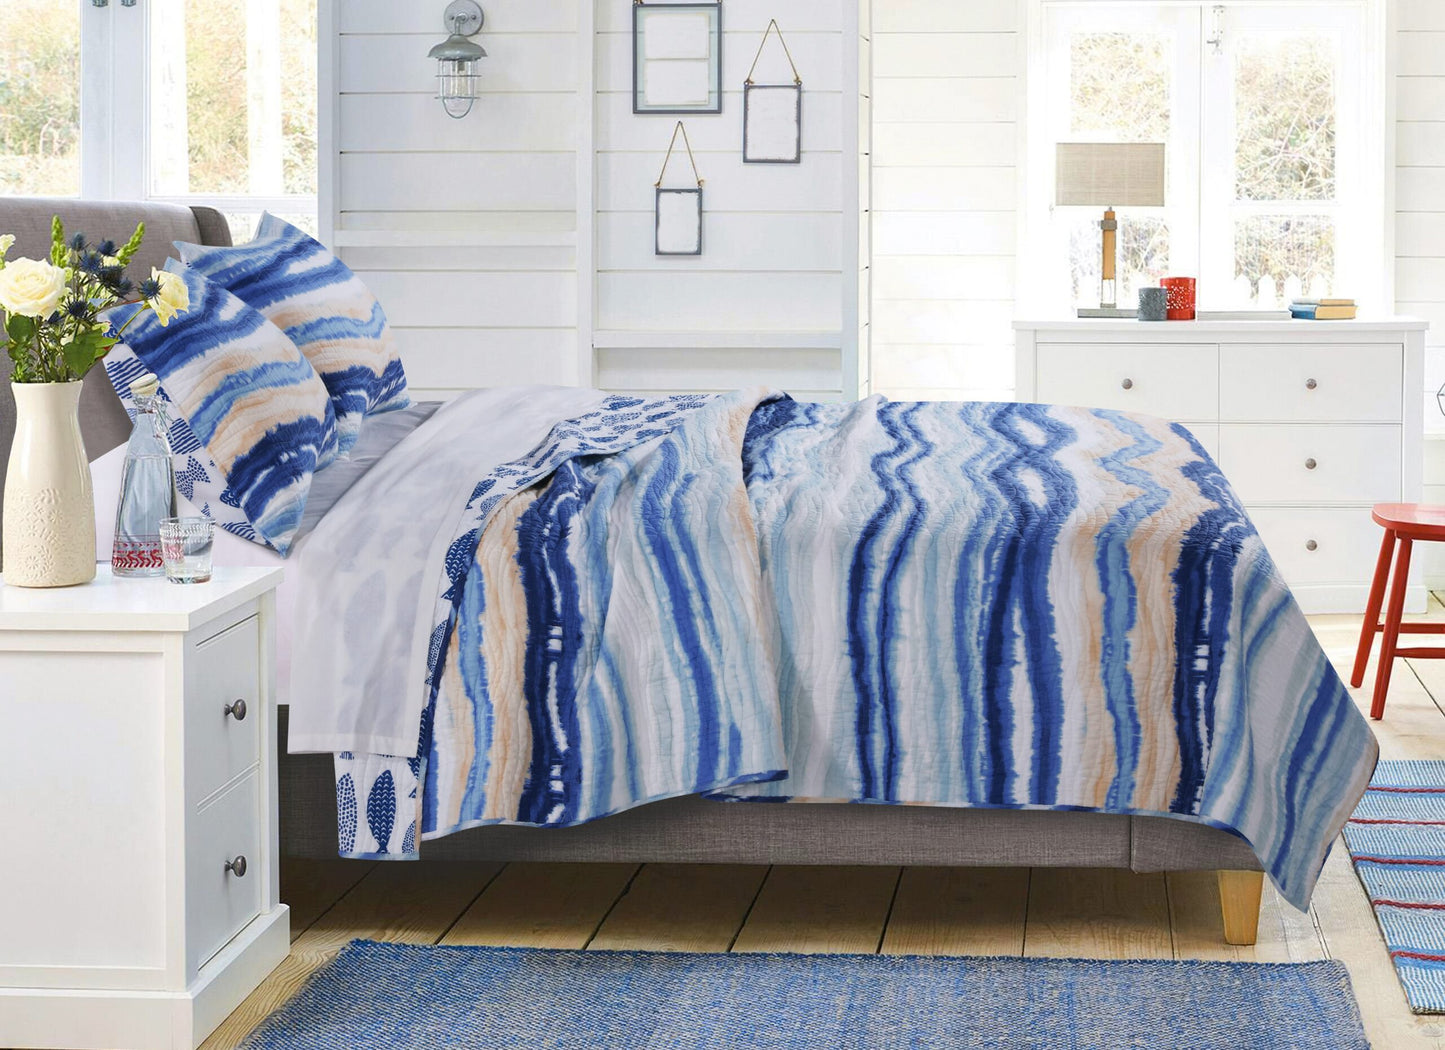 Crystal Cove Quilt Set